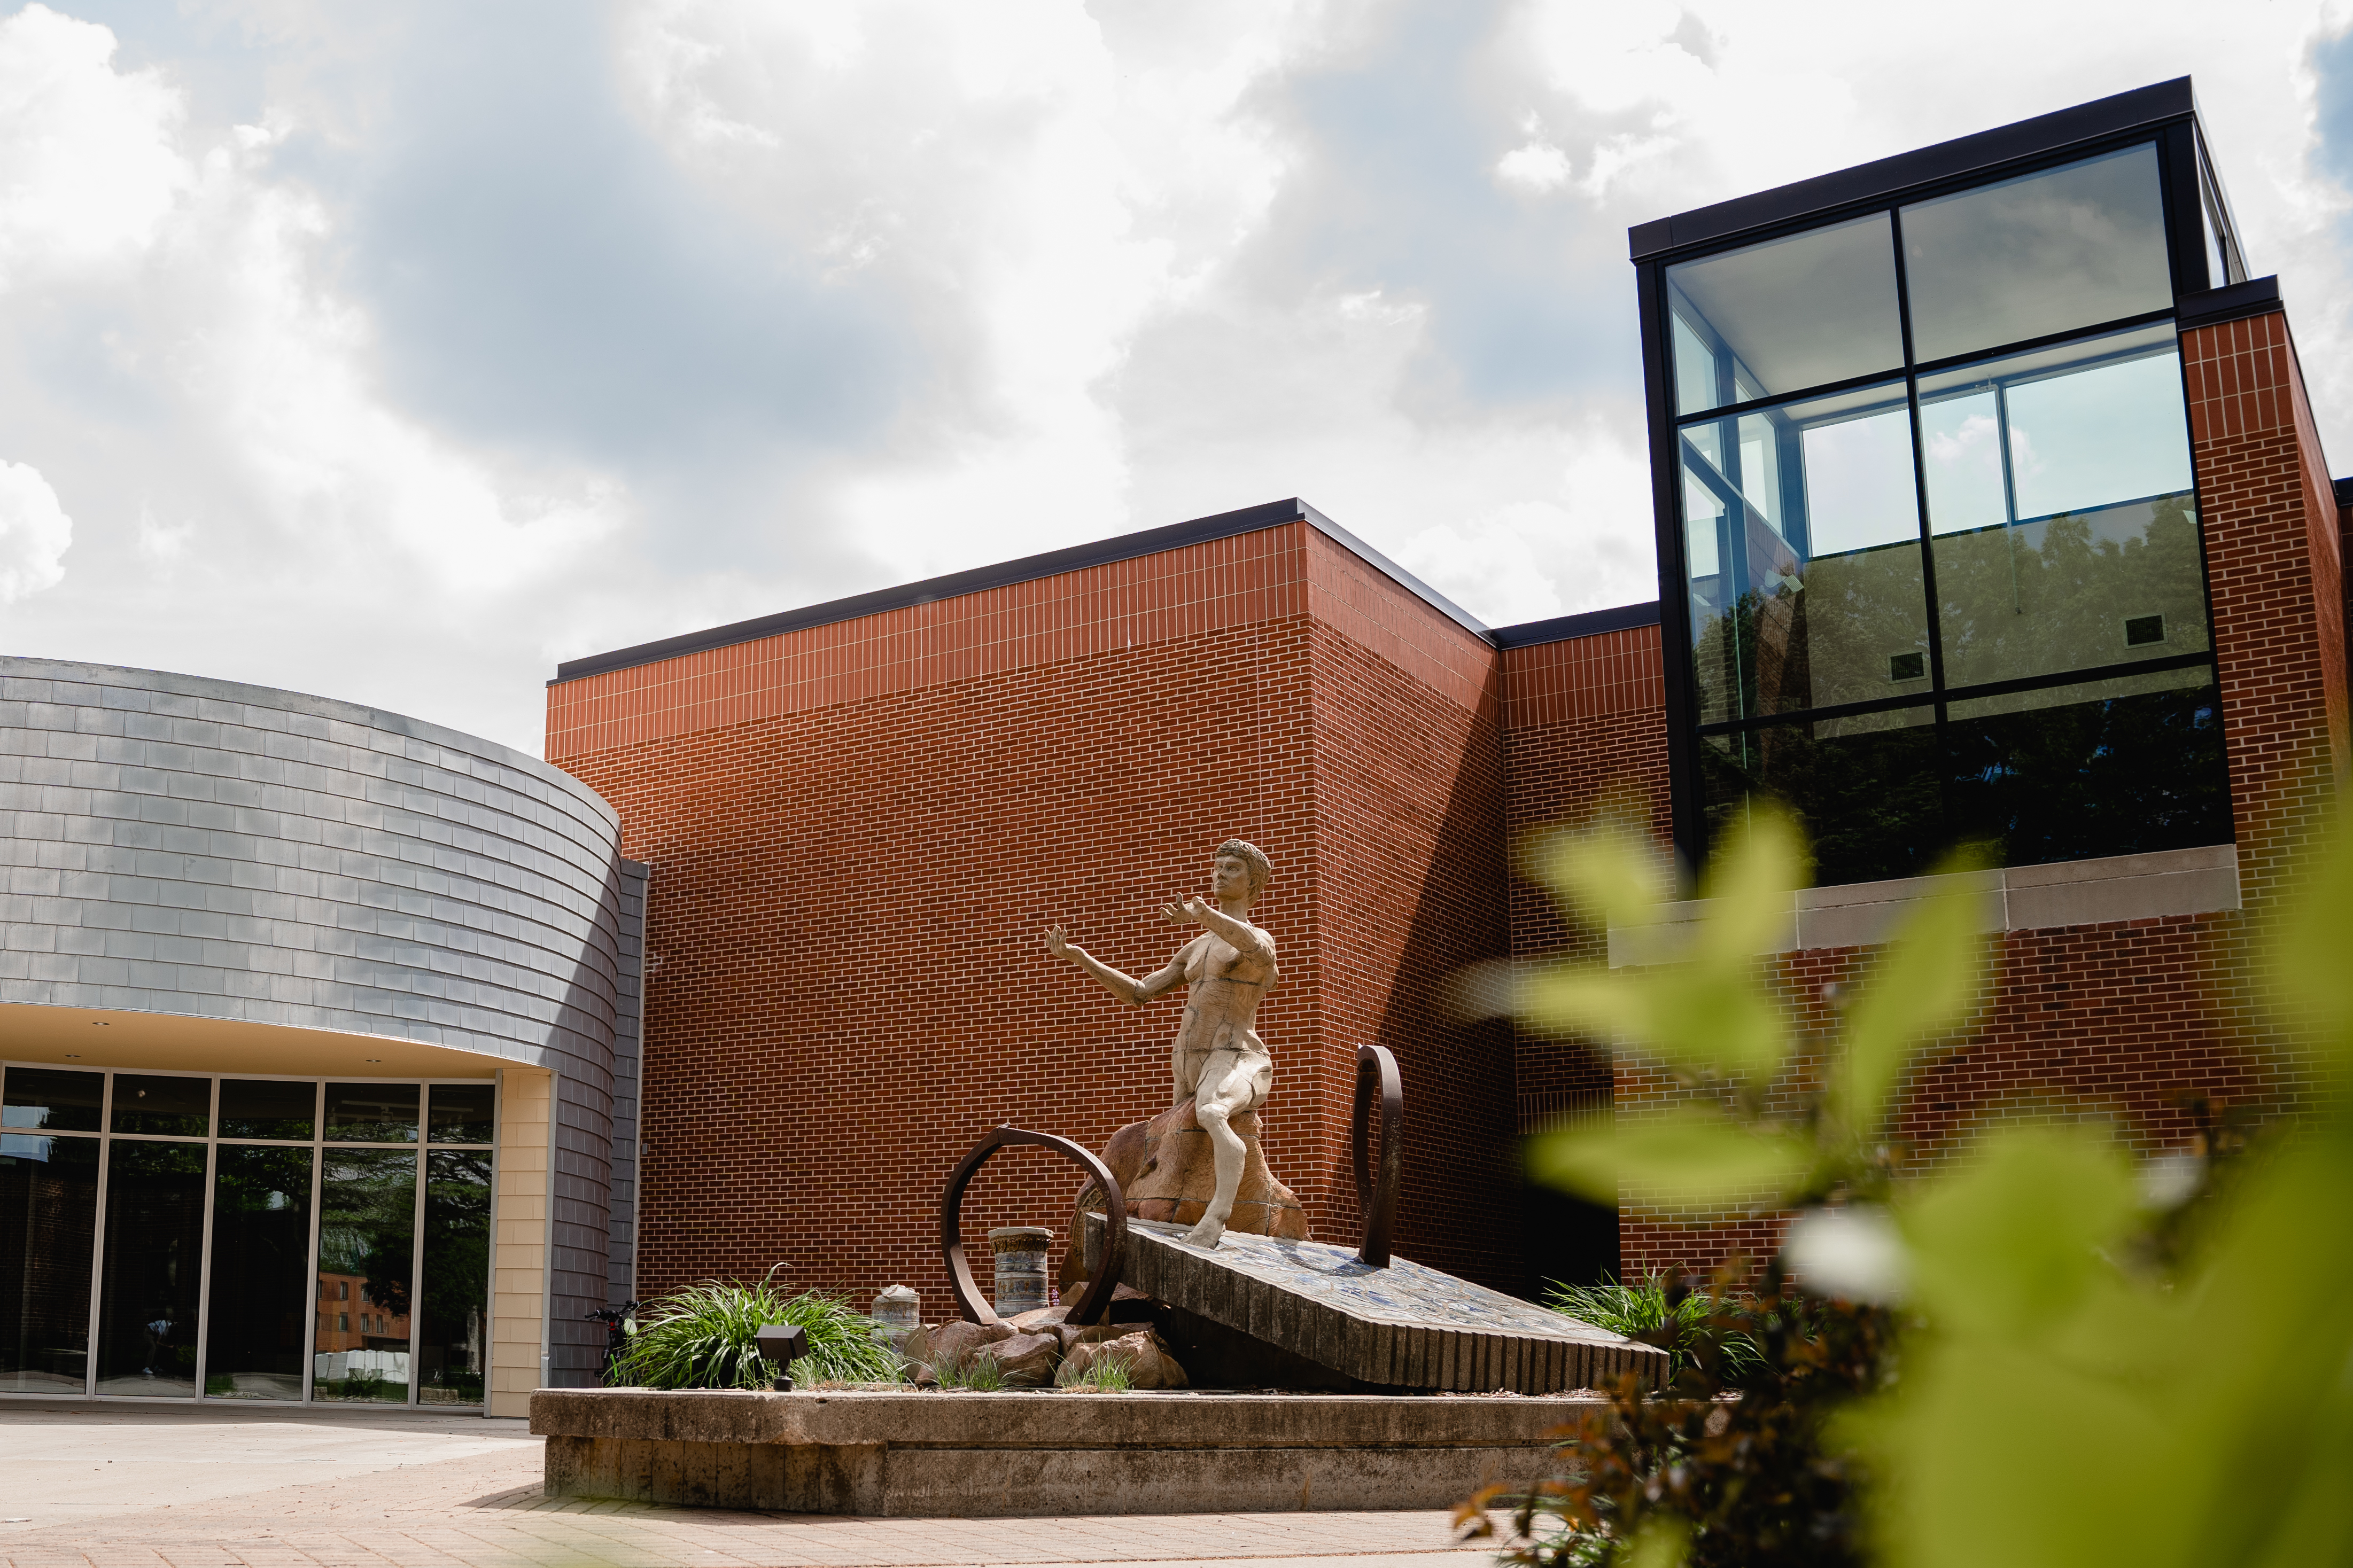 A photo of "The Gift" a statue of David on campus